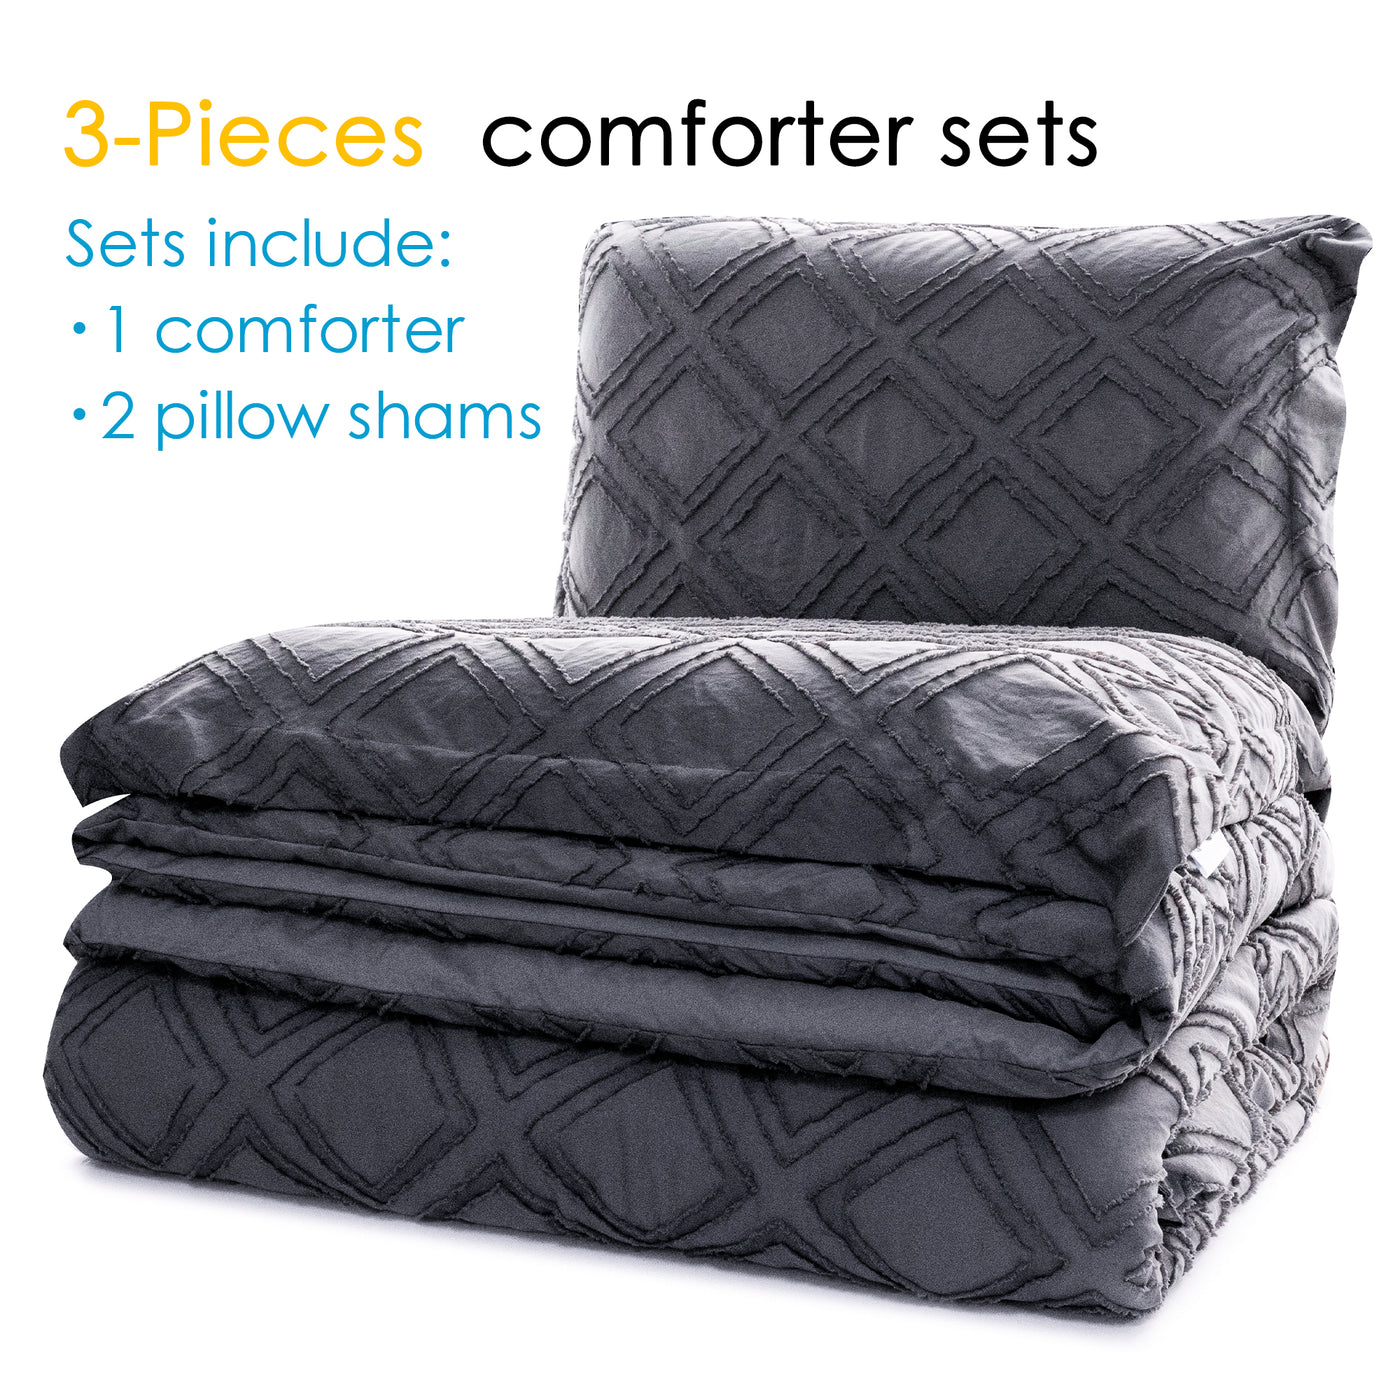 Tufted Lace Comforter Sets